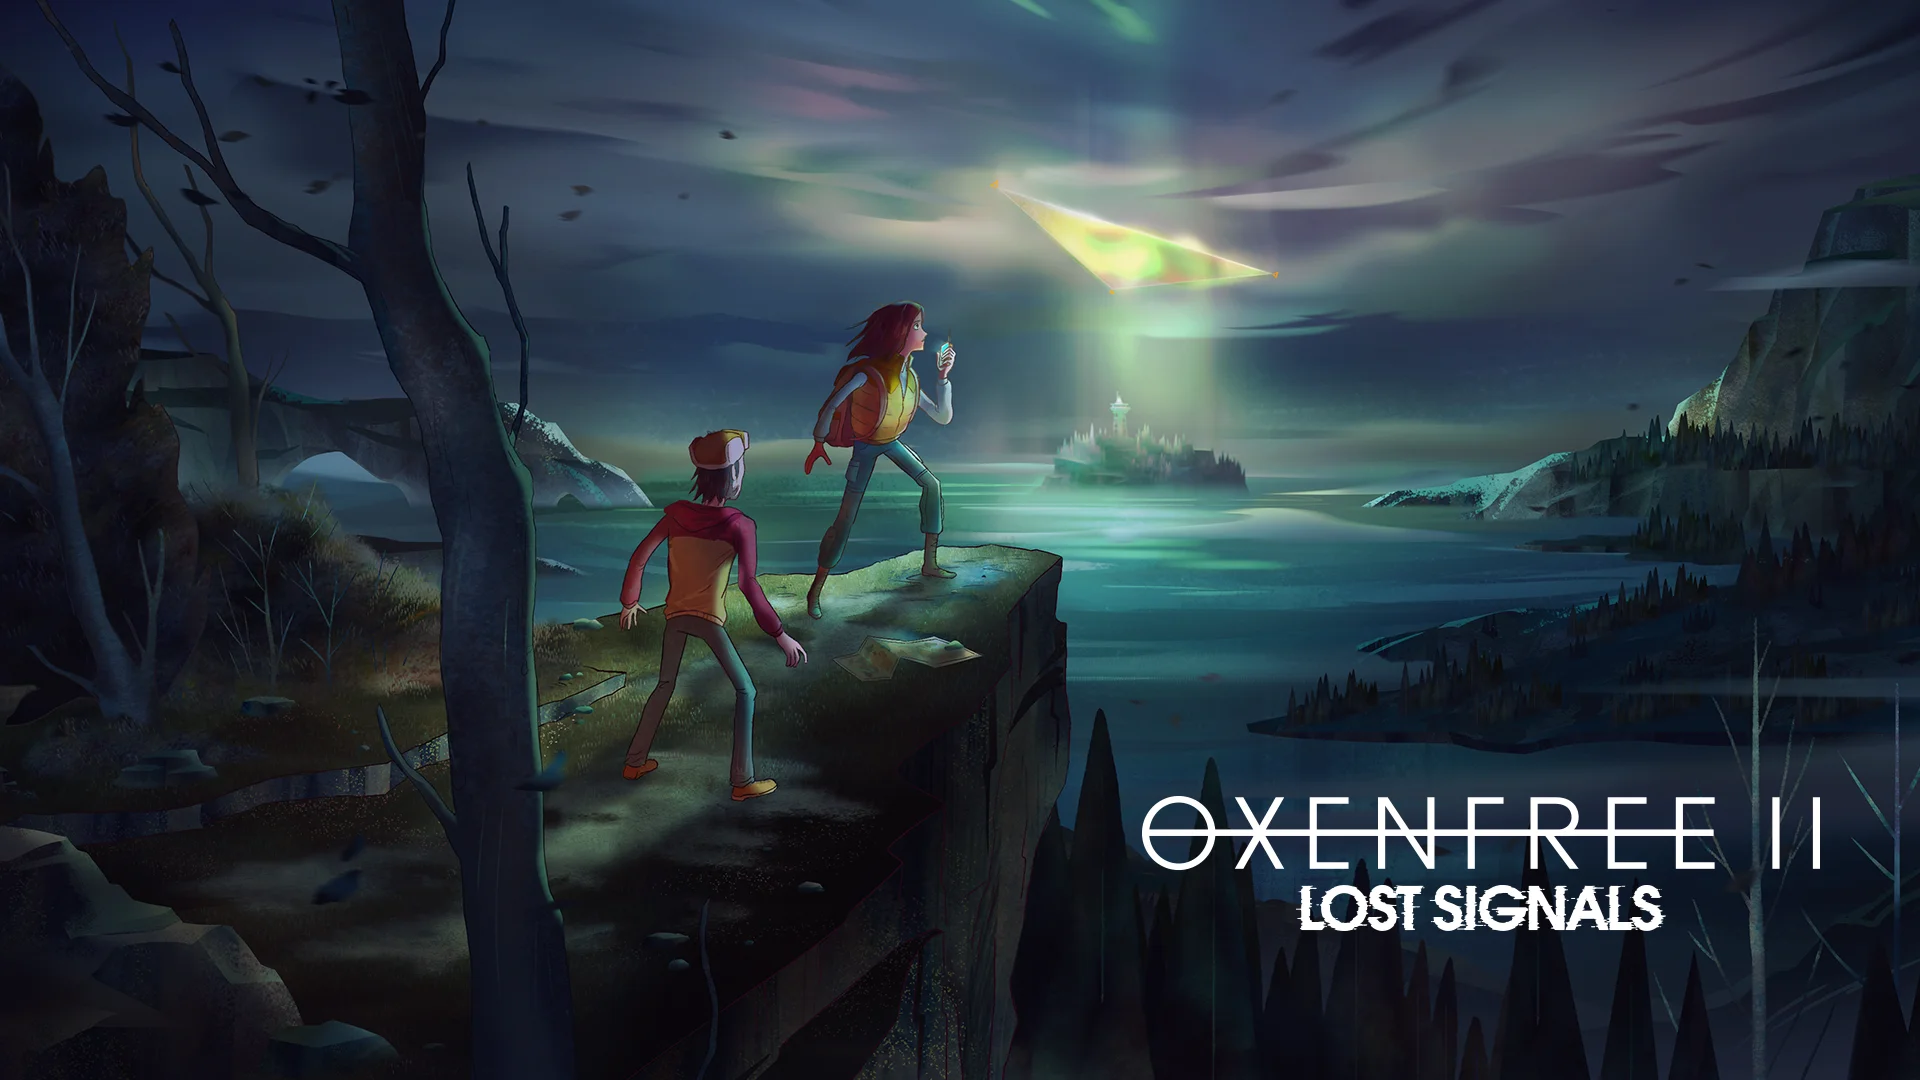 Oxenfree II: Lost Signals artwork of two young adults on a forest cliffside looking at a glowing triangle in the air above an island in a lake